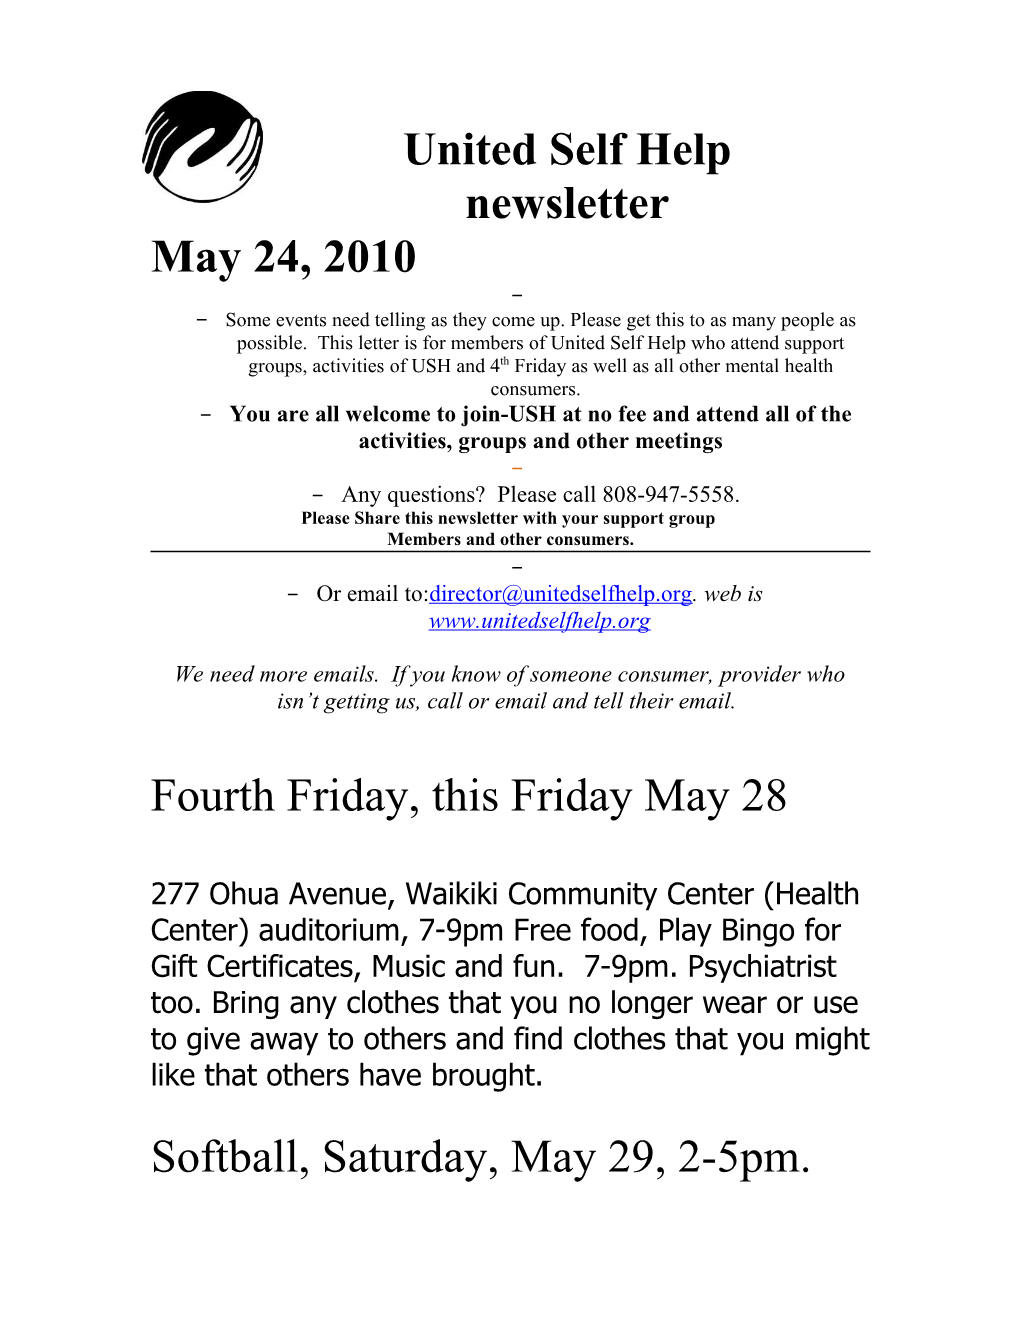 Please Share This Newsletter with Your Support Group